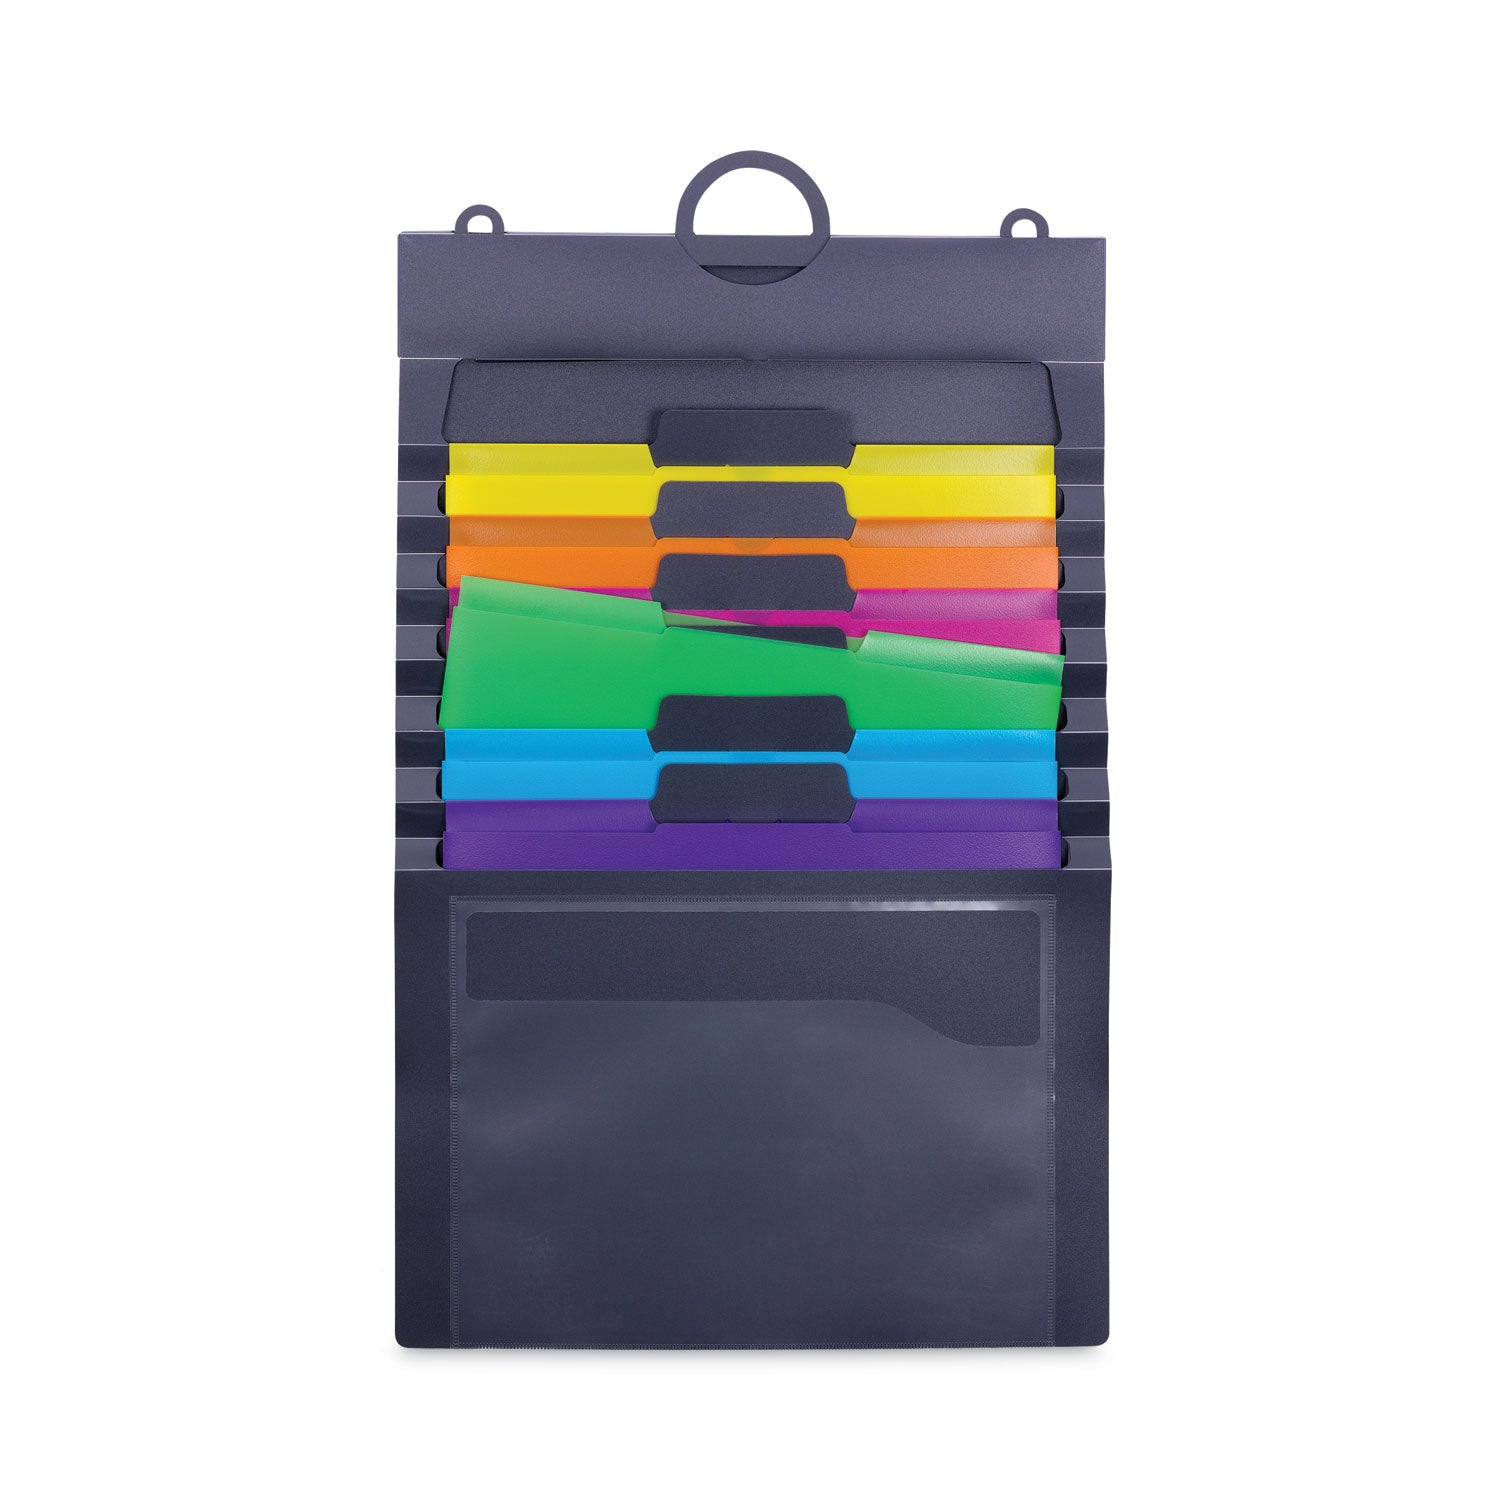 cascading-wall-organizer-6-sections-letter-size-1425-x-2425-gray-neon-green-neon-orange-neon-pink-purple-yellow_smd92060 - 1